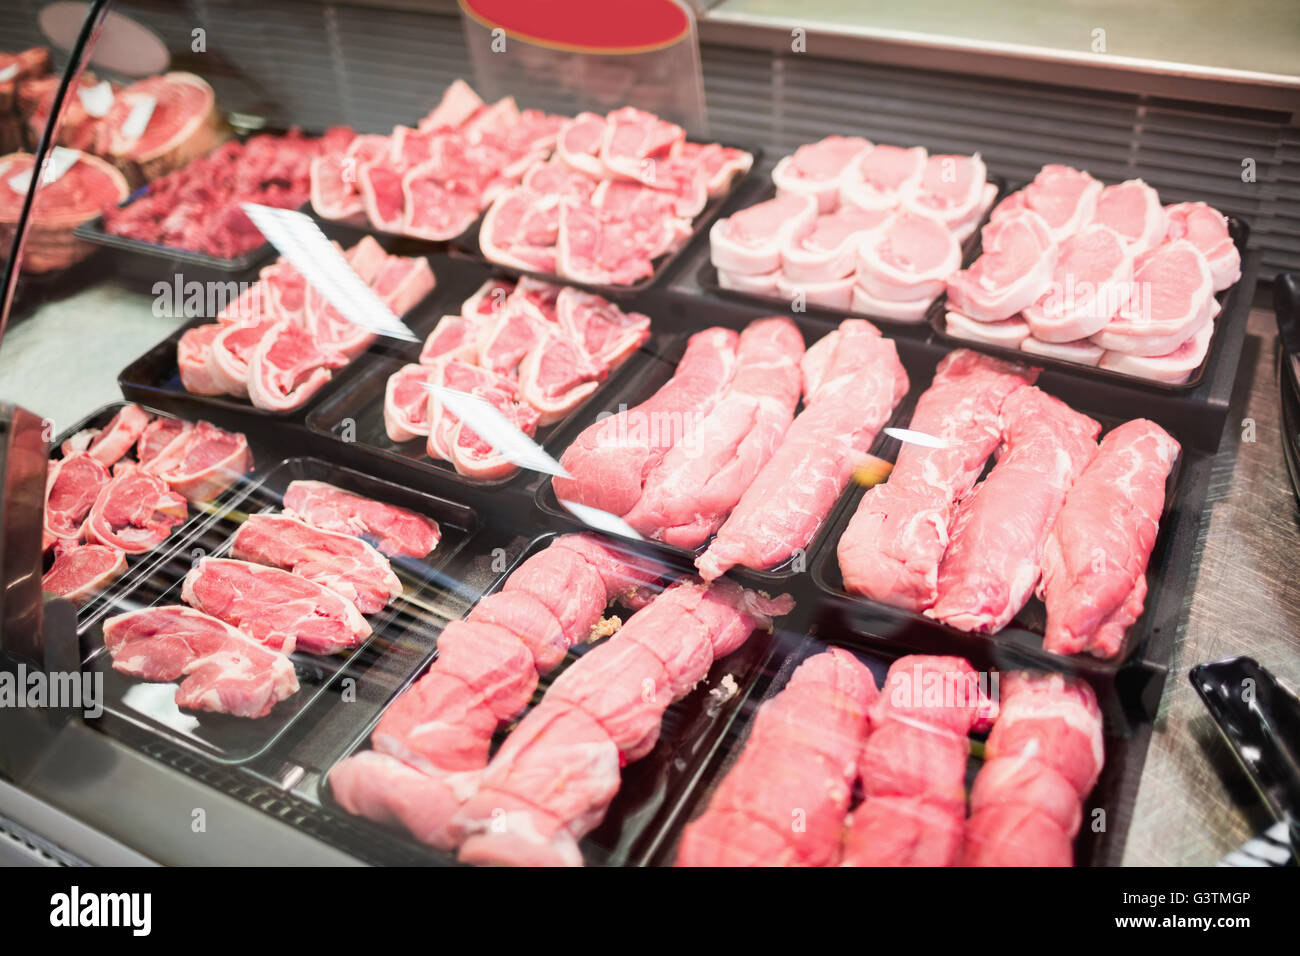 Sales counter with meat Stock Photo